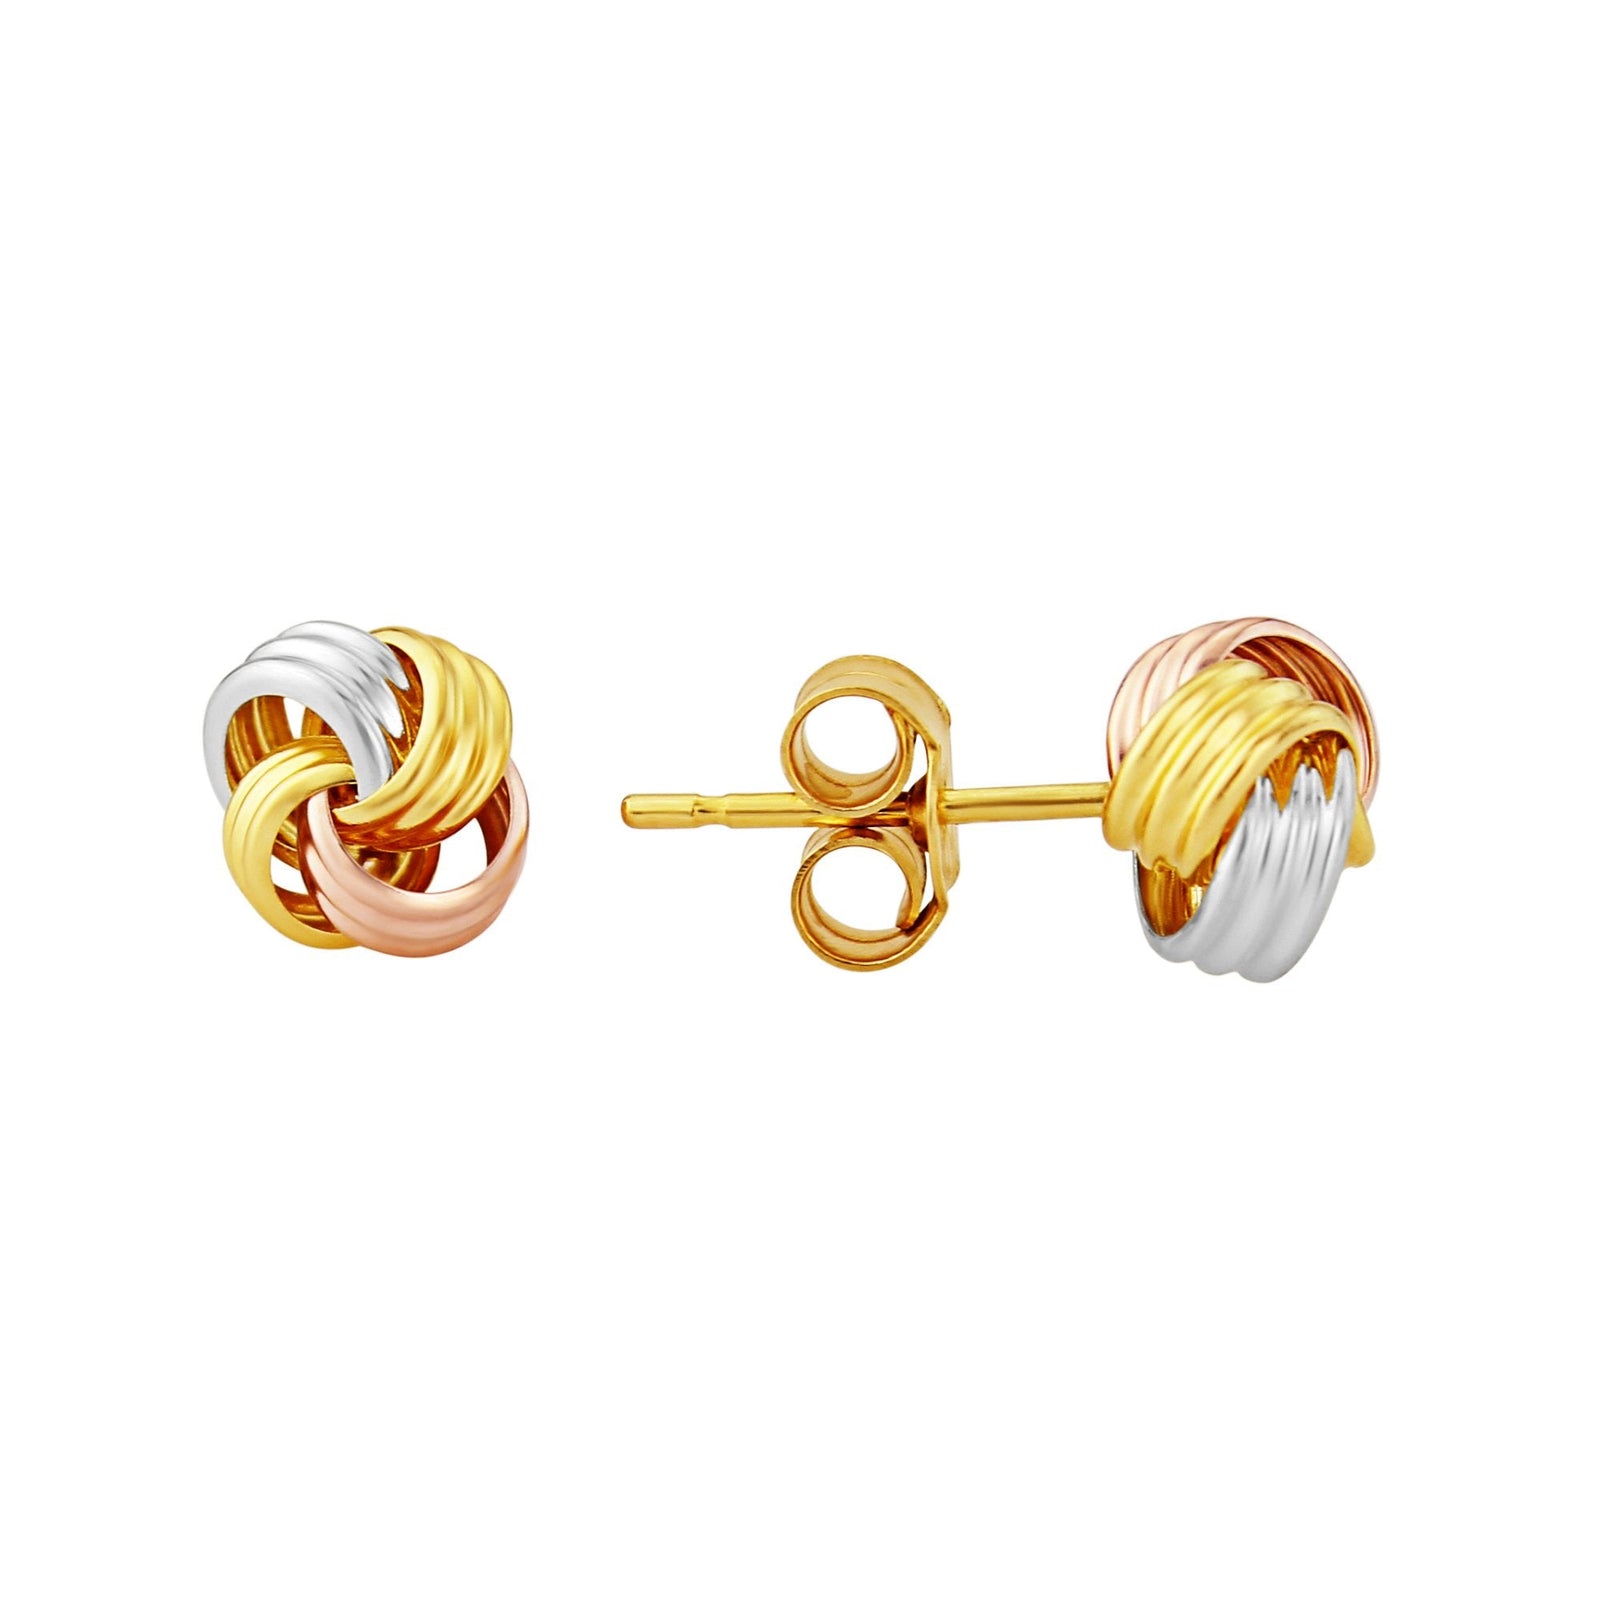 9ct m/c gold 3 strand knot stud earrings